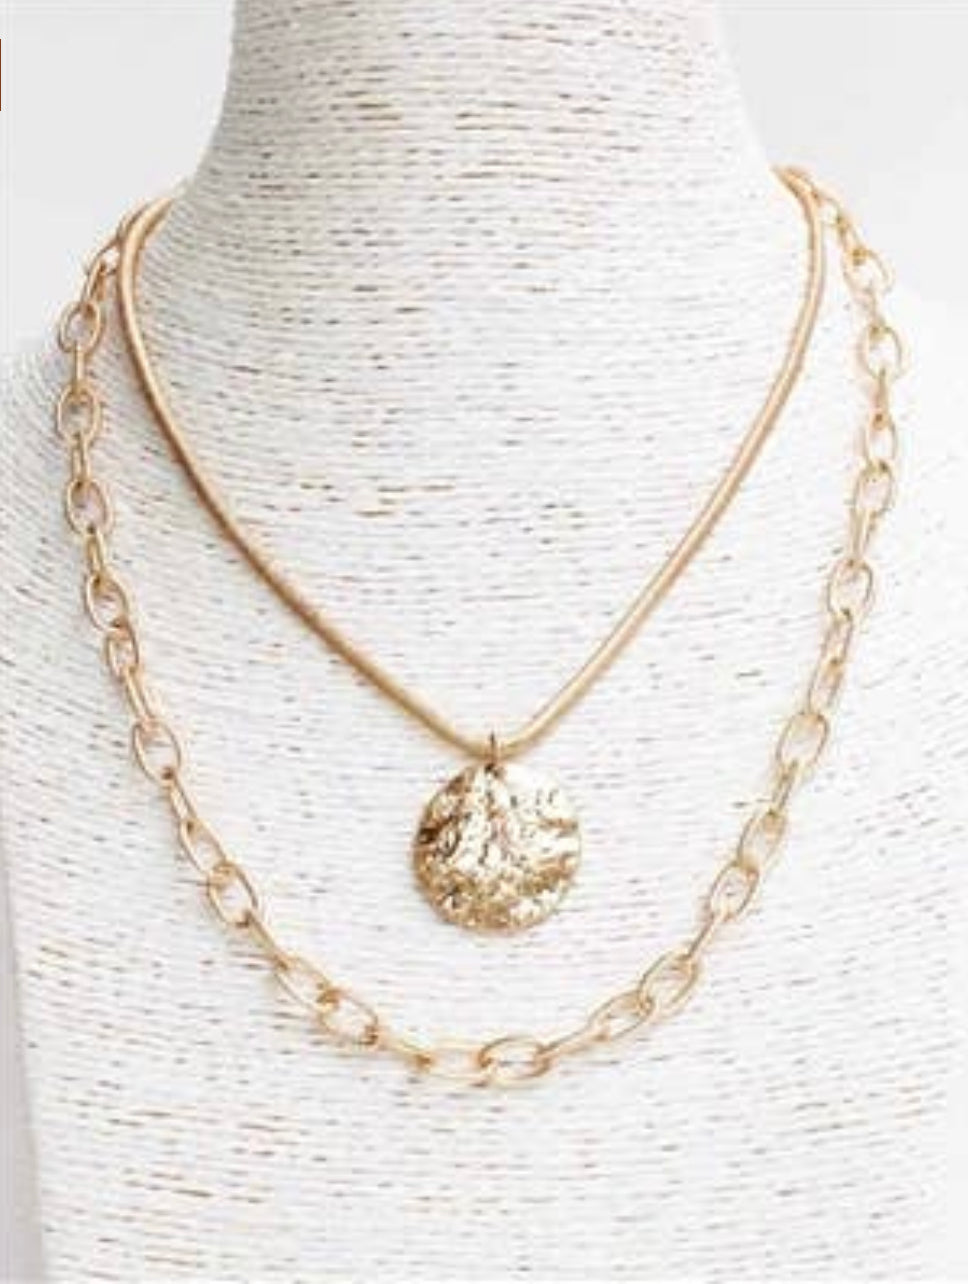 Hammered Gold 1" Circle with Layered Chain 16-18" Necklace